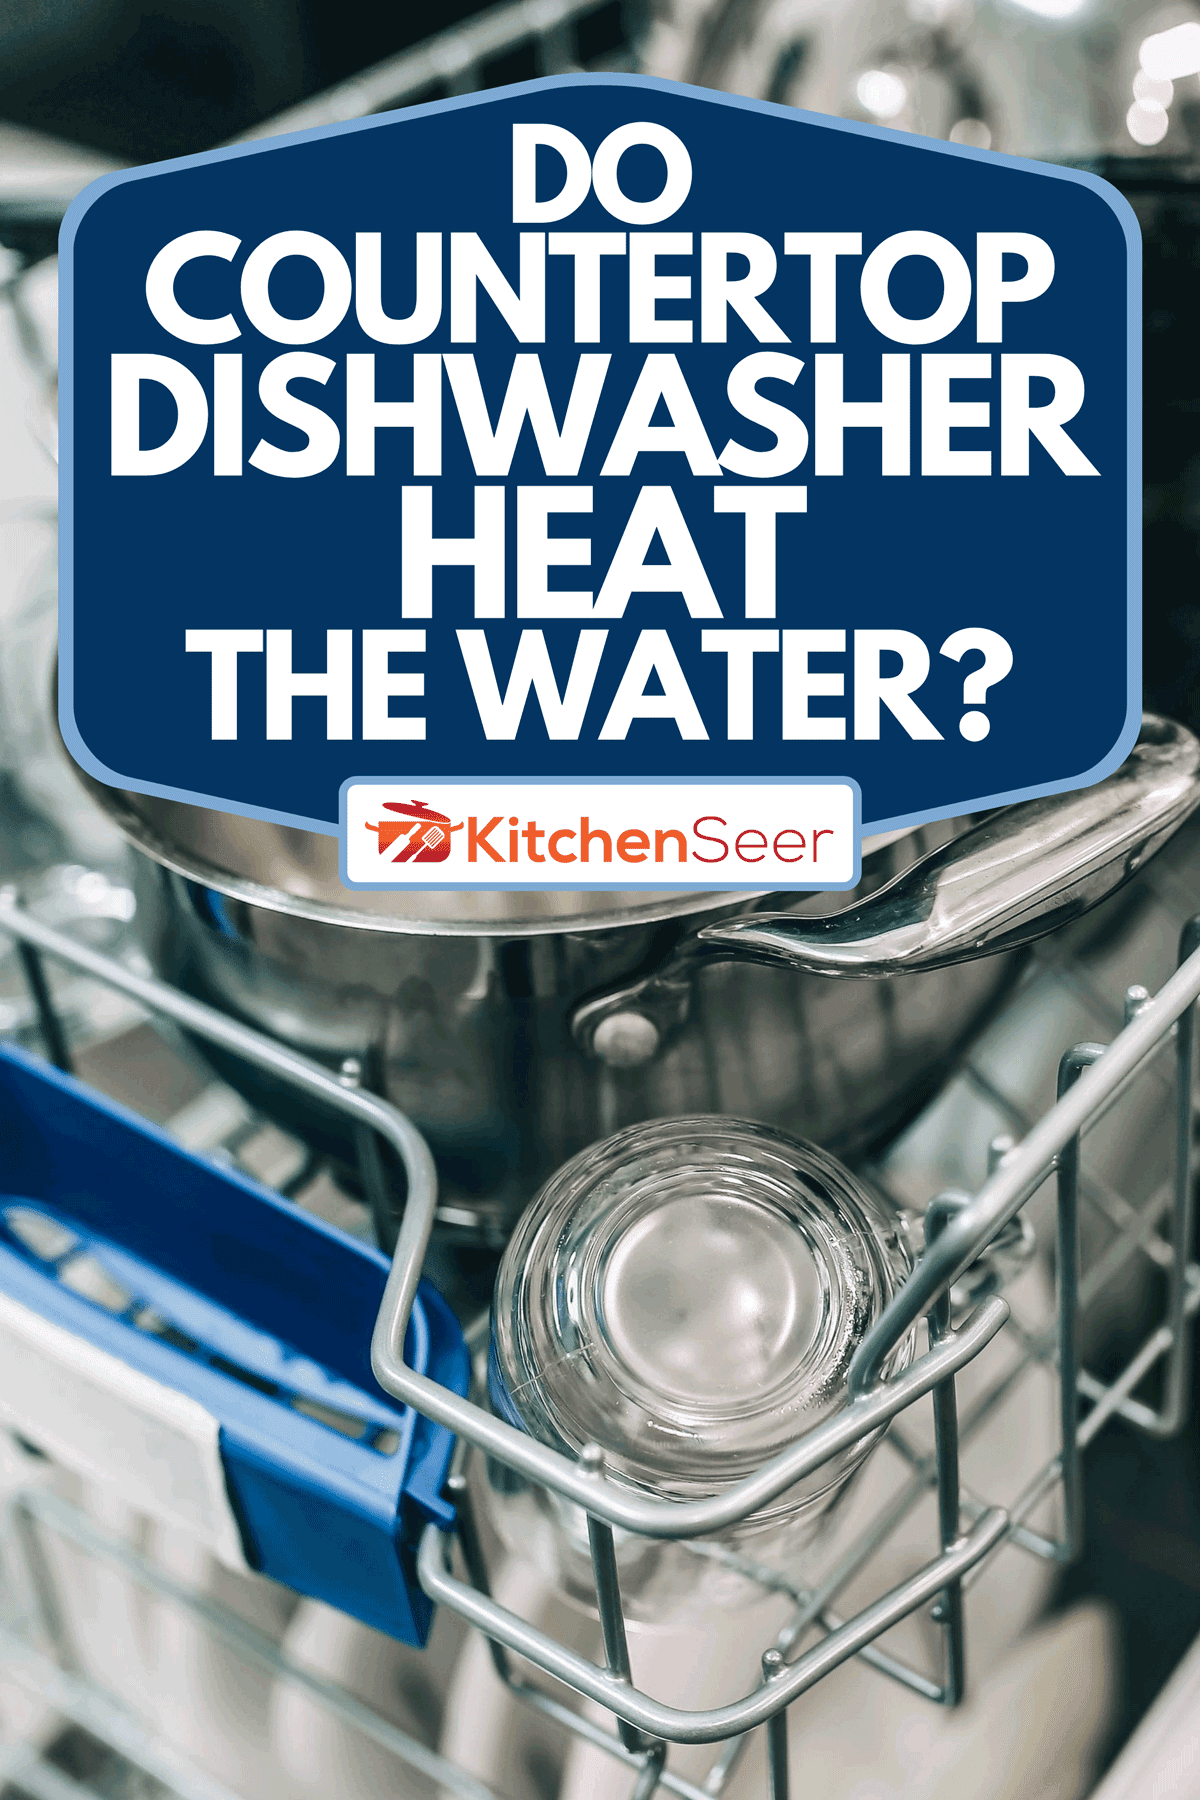 Dishes in modern dishwasher in the kitchen, Do Countertop Dishwashers Heat The Water?